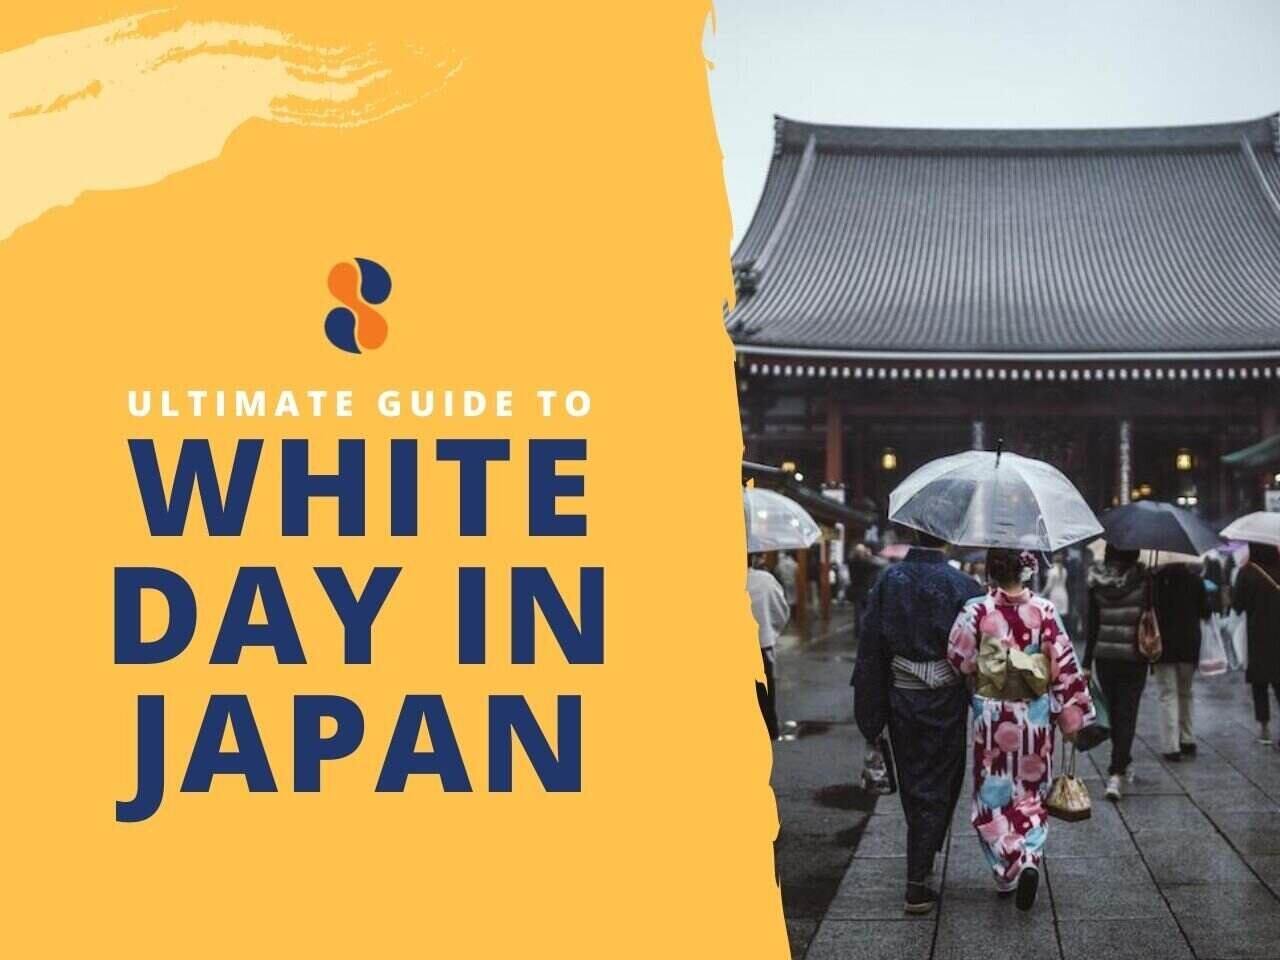 A few things about White Day